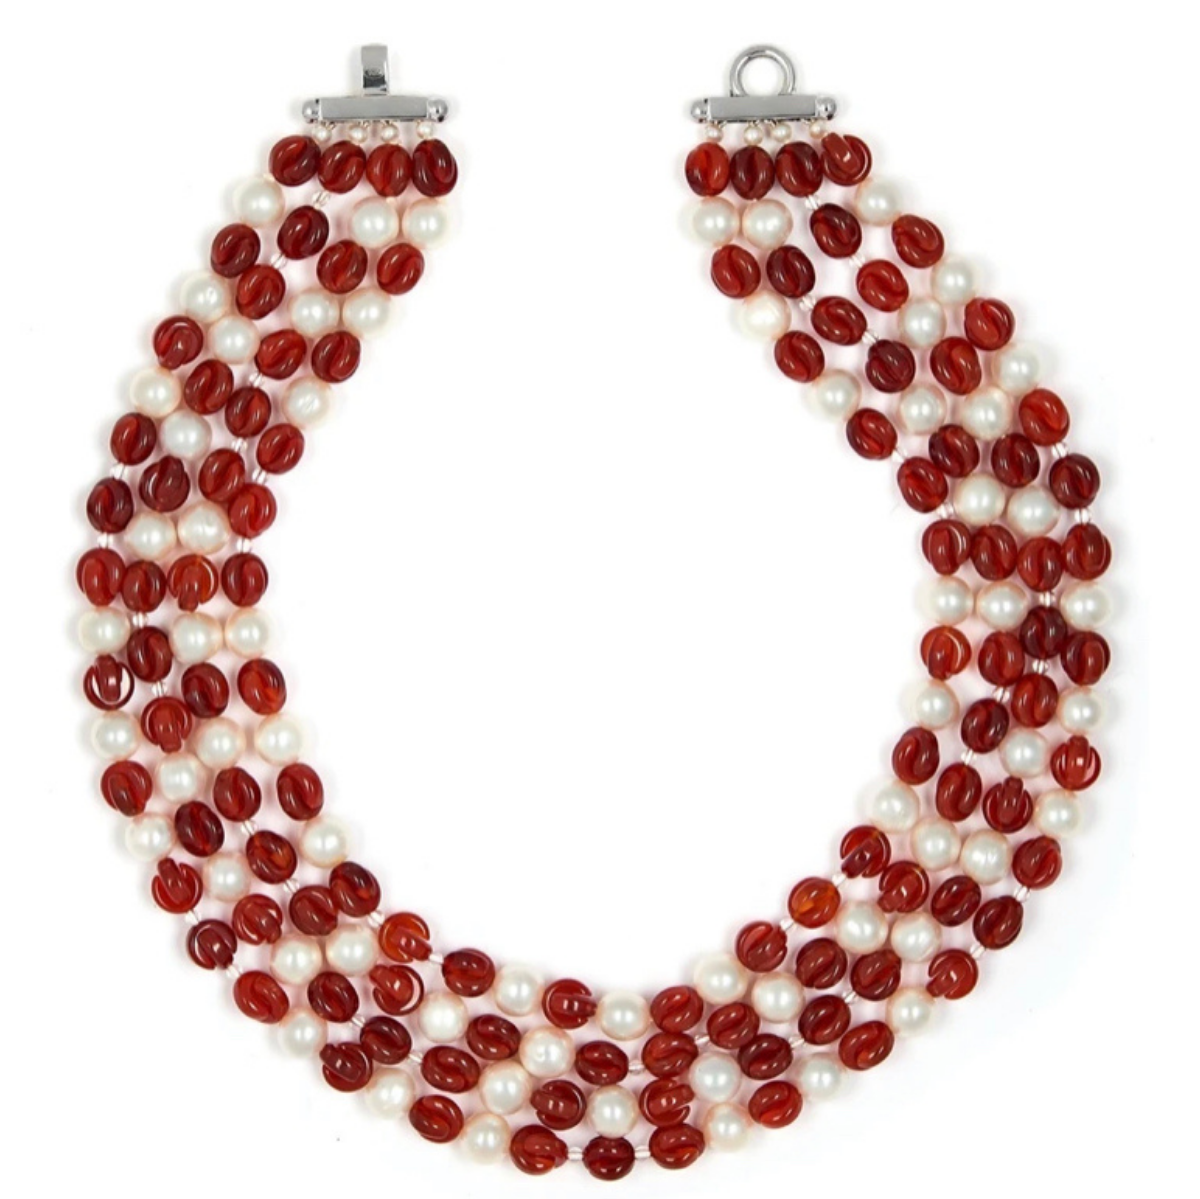 Carnelian and Pearl Grace Knot Necklace